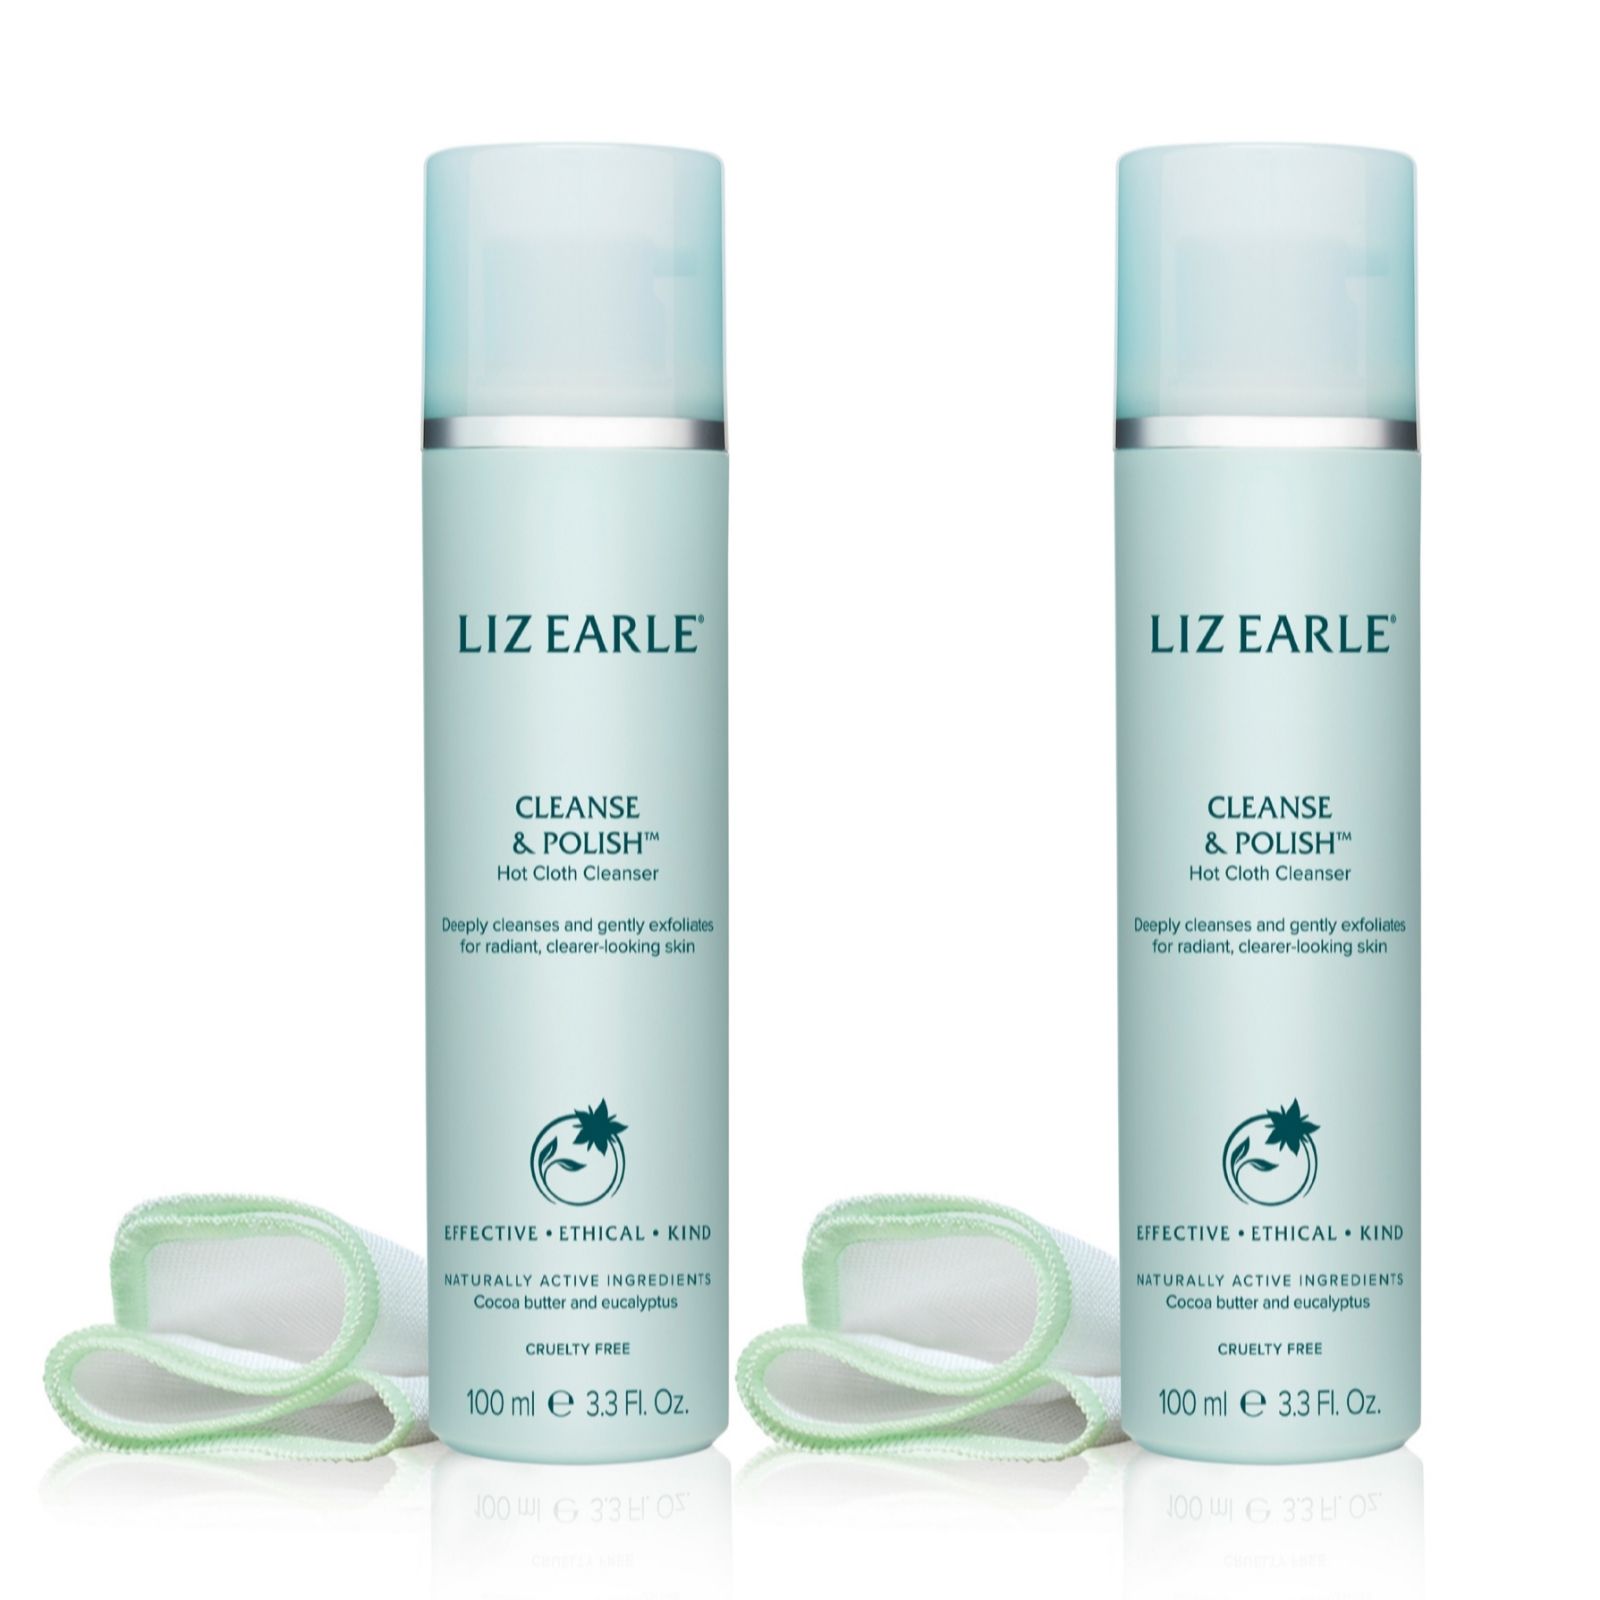 Liz Earle Cleanse And Polish Hot Cloth Cleanser 100ml Duo Qvc Uk